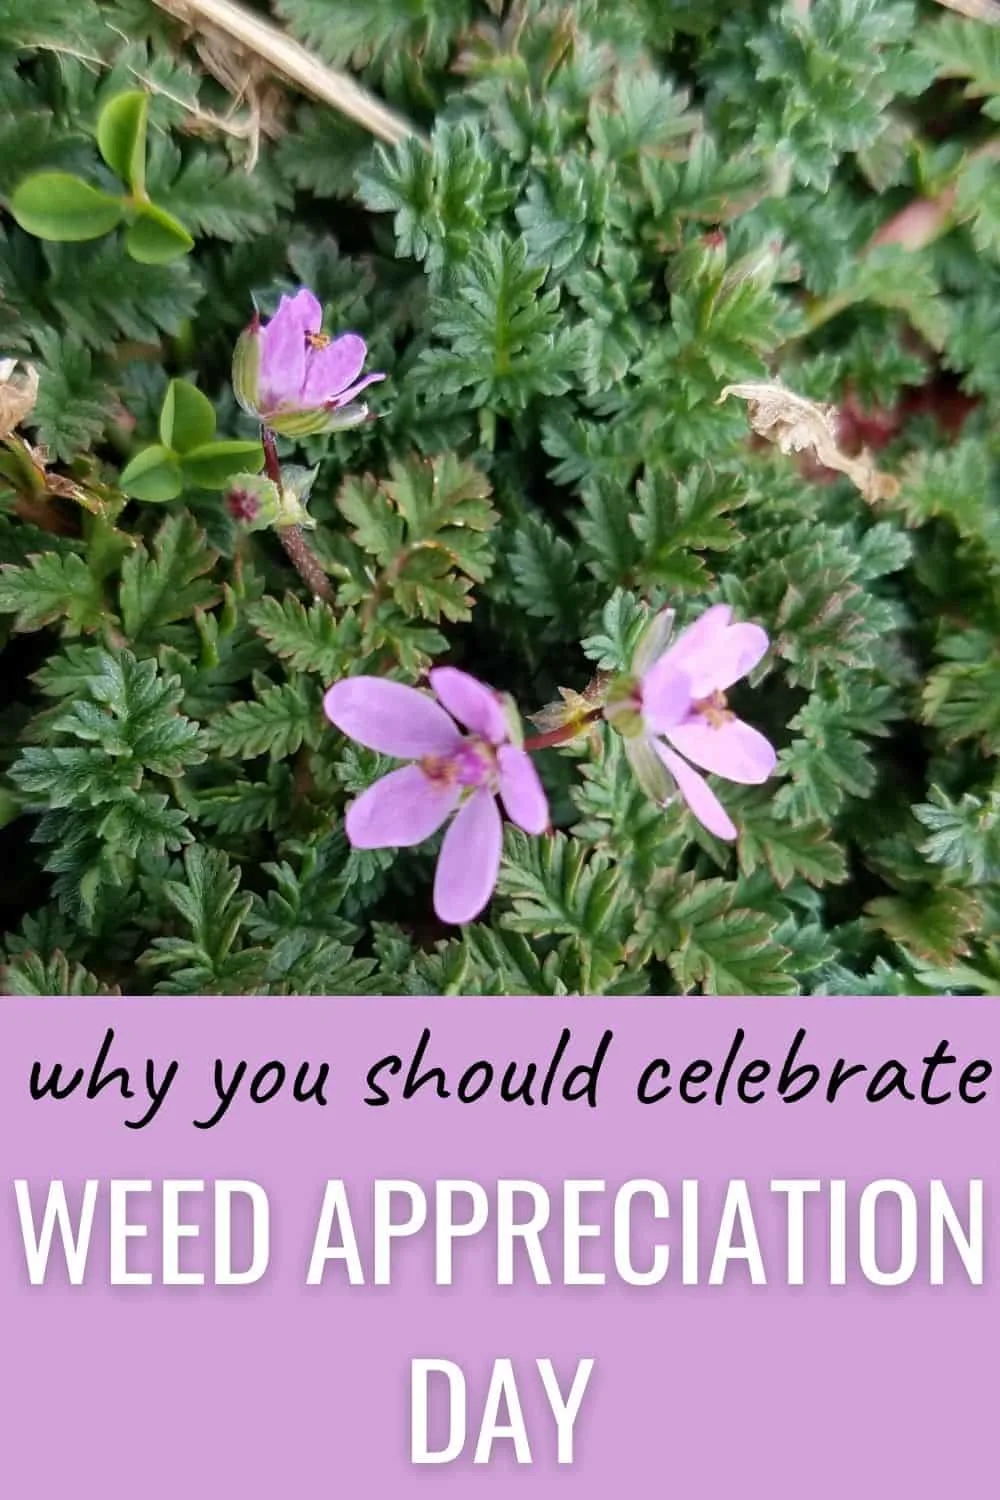 Why should you celebrate weed appreciation day?